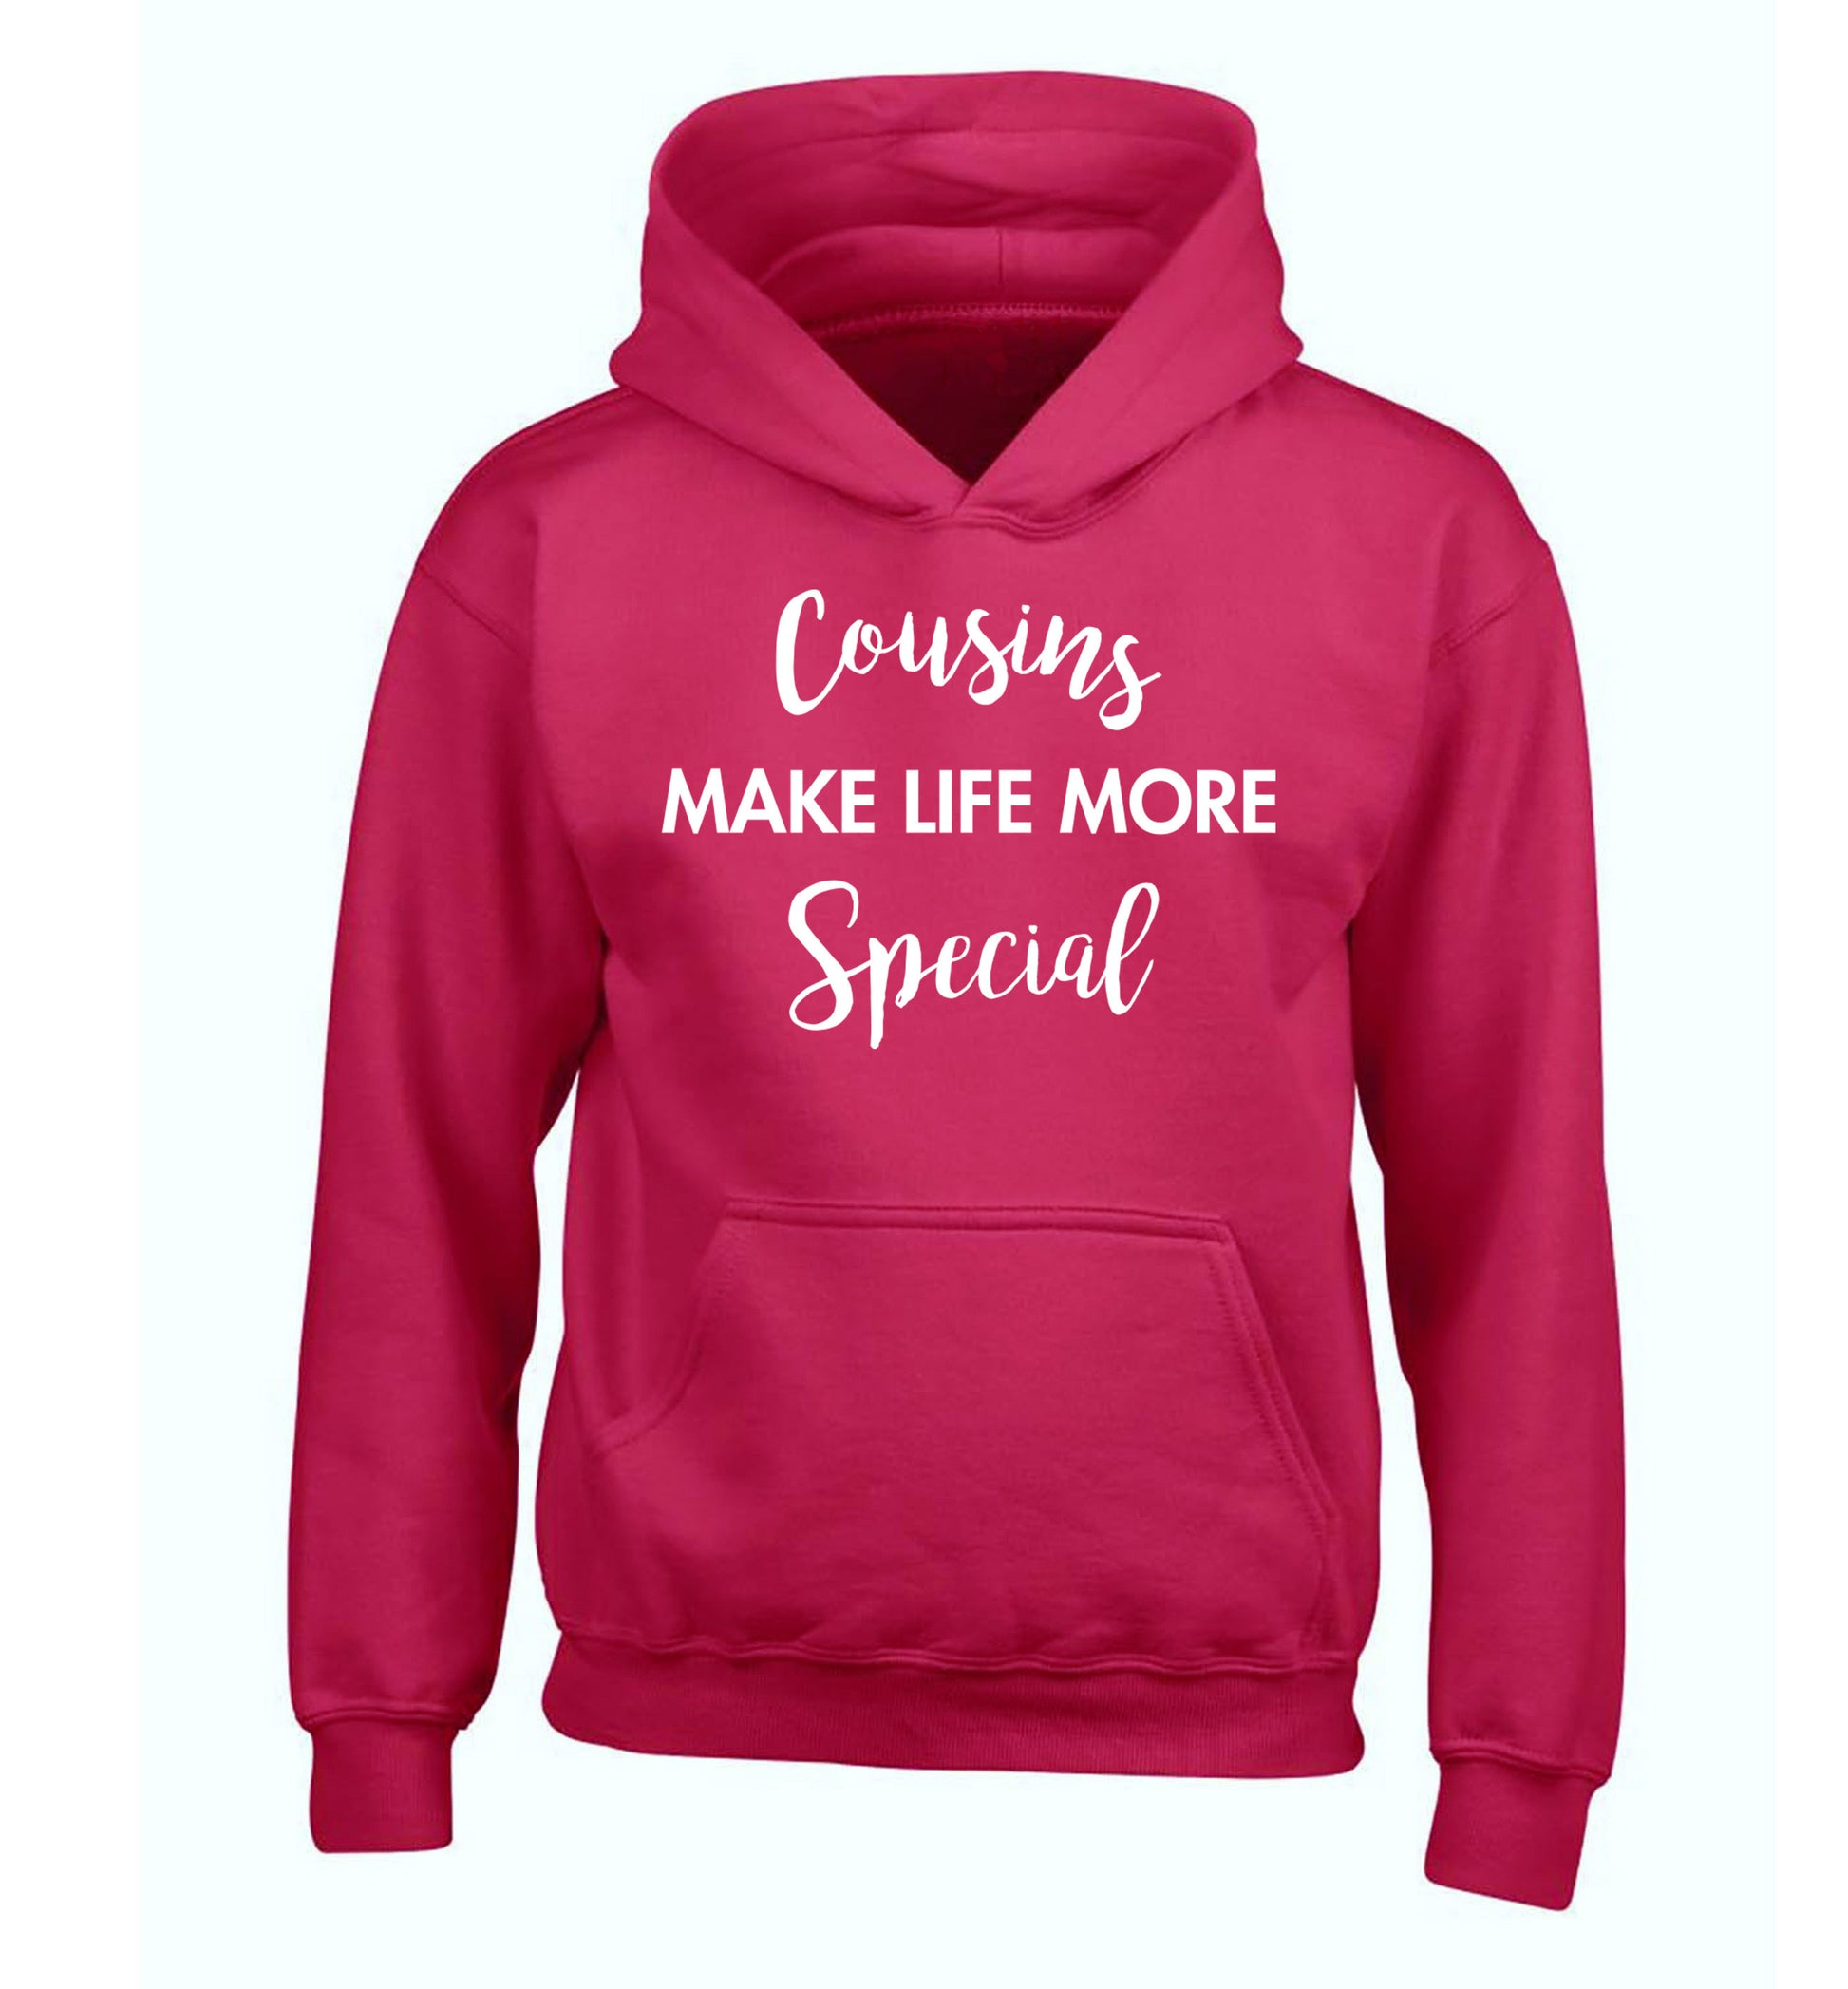 Cousins make life more special children's pink hoodie 12-14 Years